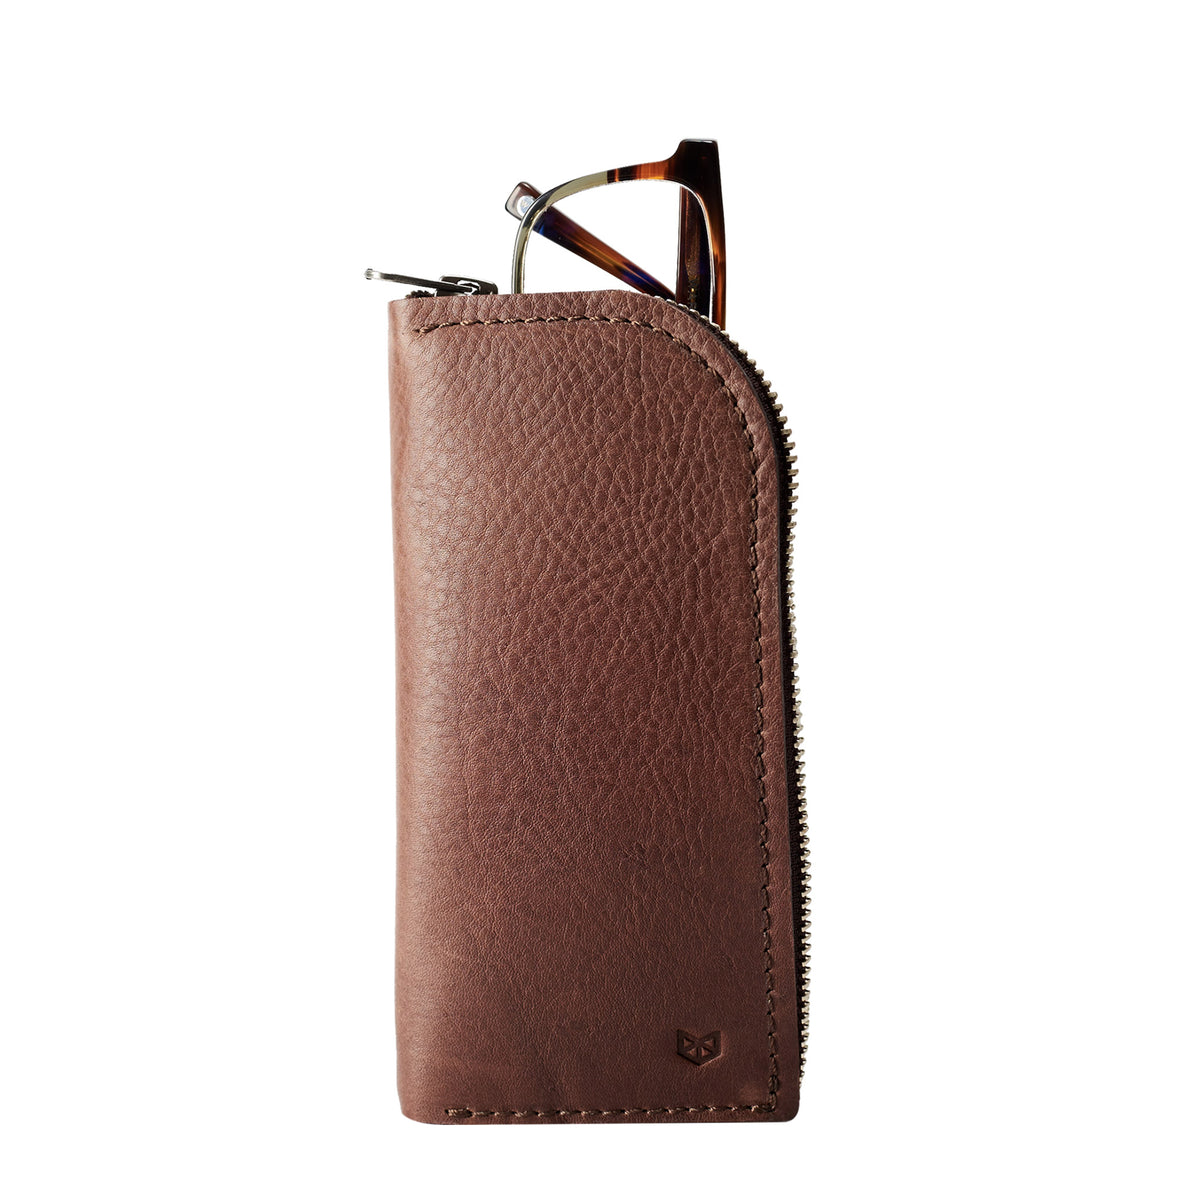 Gifts for men. Brown leather Glasses case, sunglasses case, hand stitched leather sleeve for reading glasses